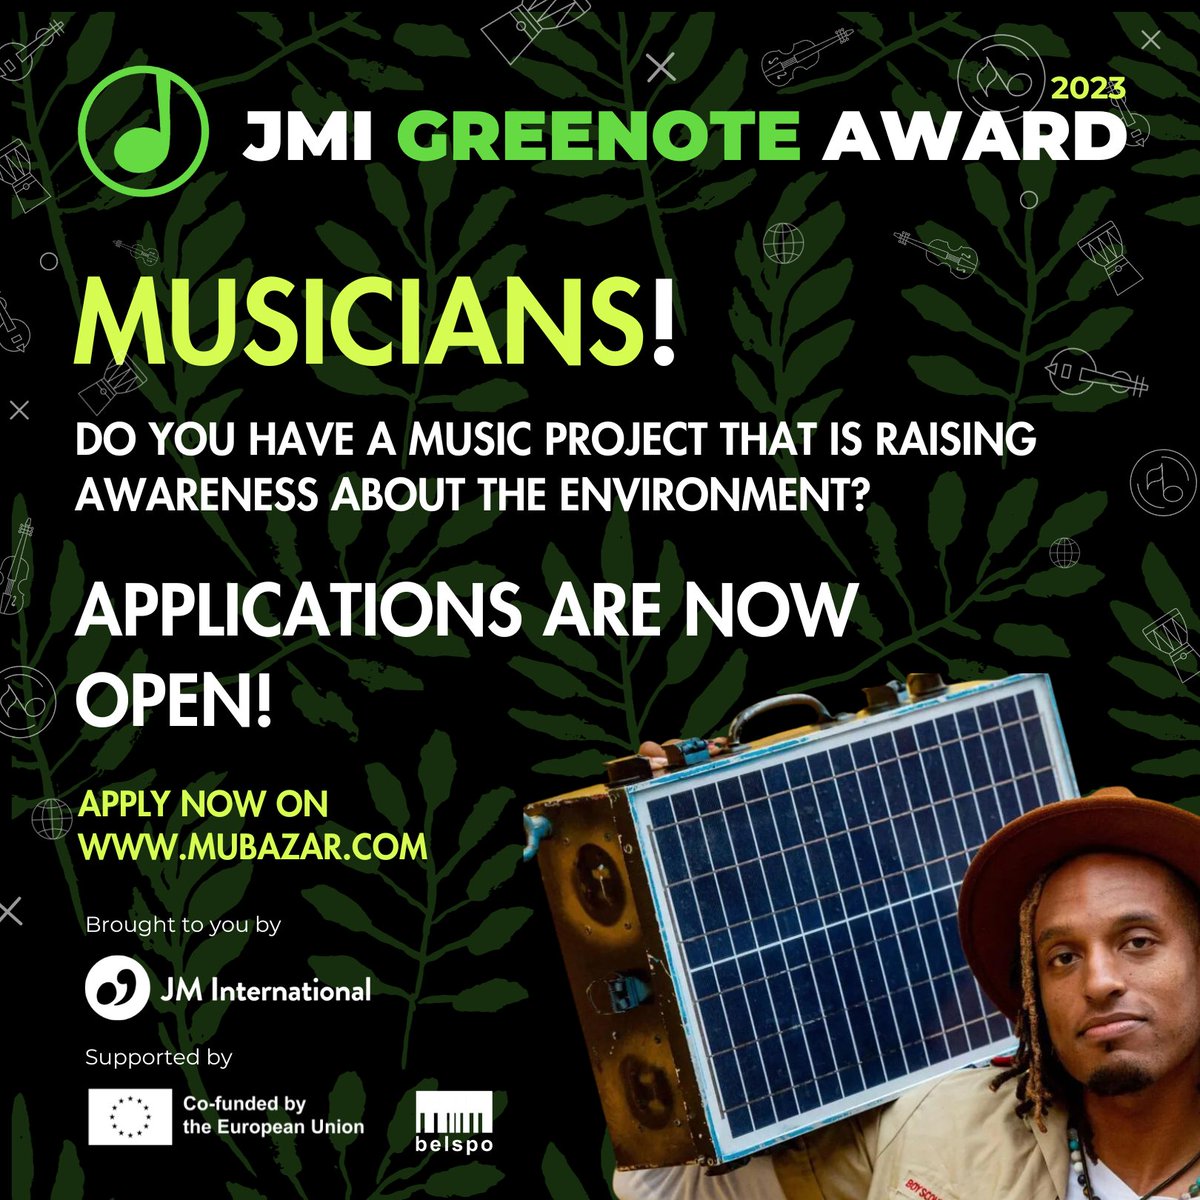 The JMI Greenote Award is back, celebrating musicians under 30 who use the power of music to raise environmental consciousness! 🌍🎶 👉 Apply here: mubazar.com/en/opportunity… And stand a chance to win €1,000! 🏆 #jmigreenote #powerofmusic #musicforchange